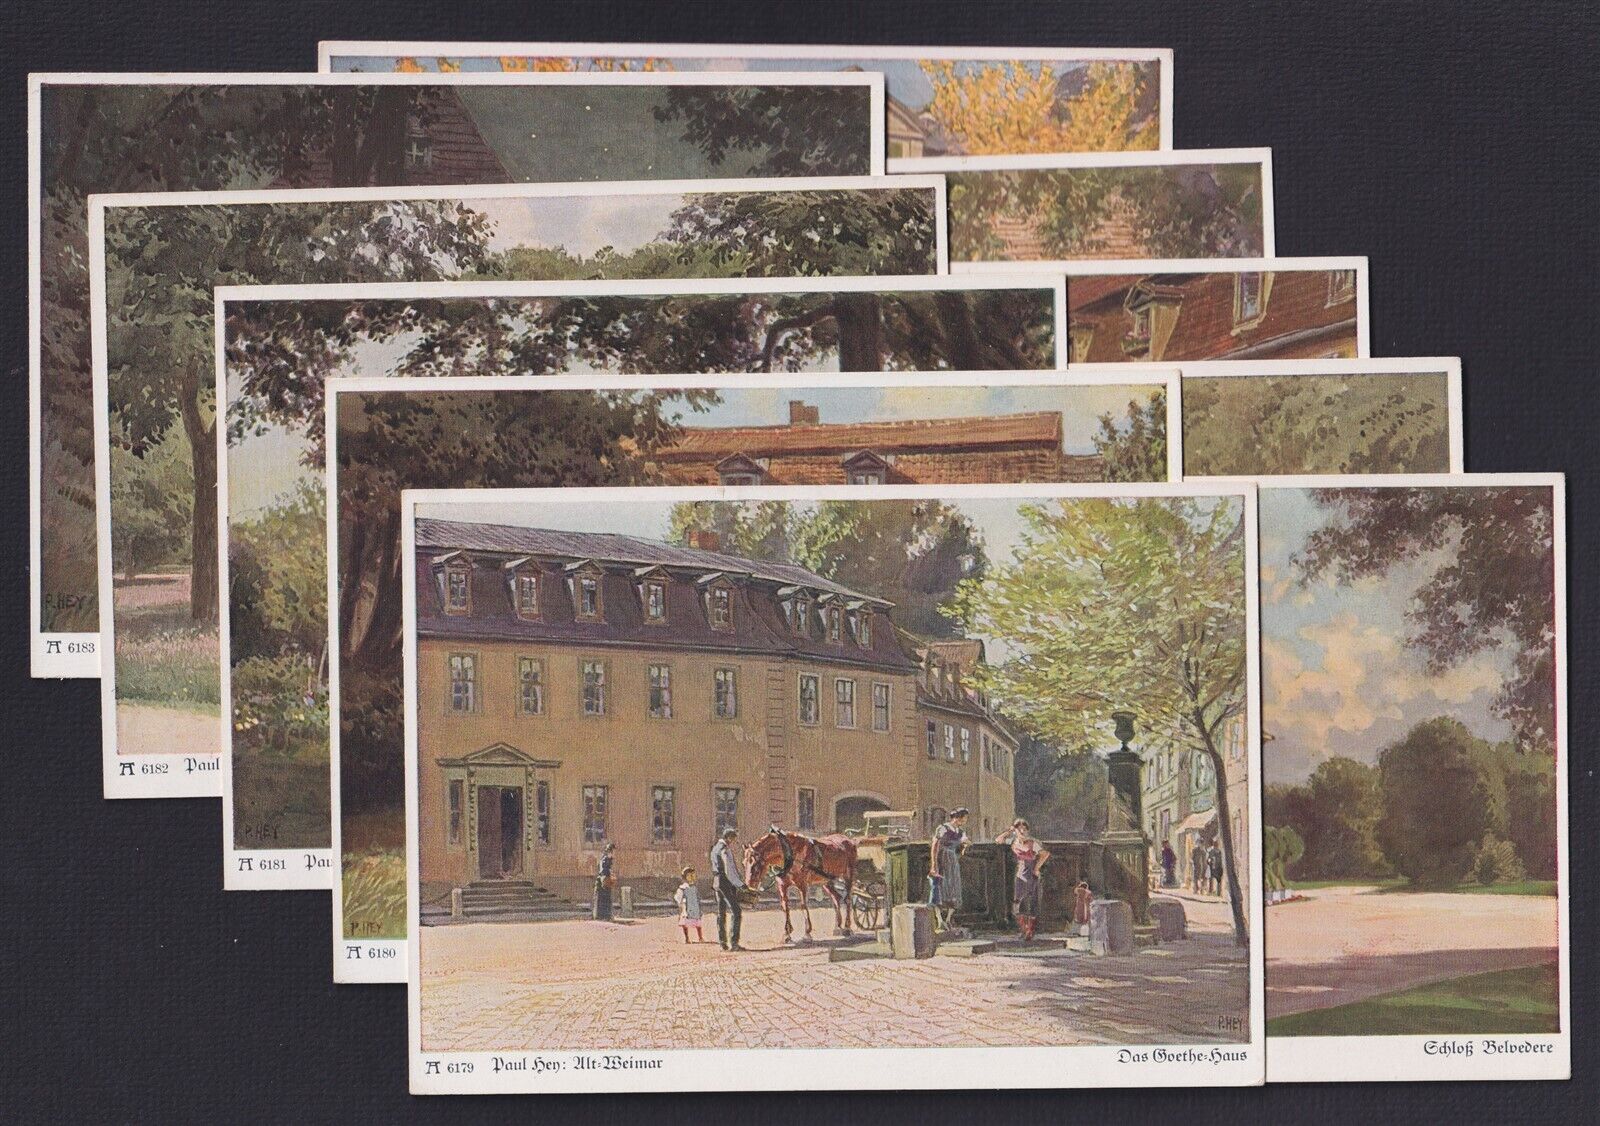 GERMANY, Postcard, Paul Hey, #6179-6188, Alt-Weimar, Set of 10 cards w/out cover